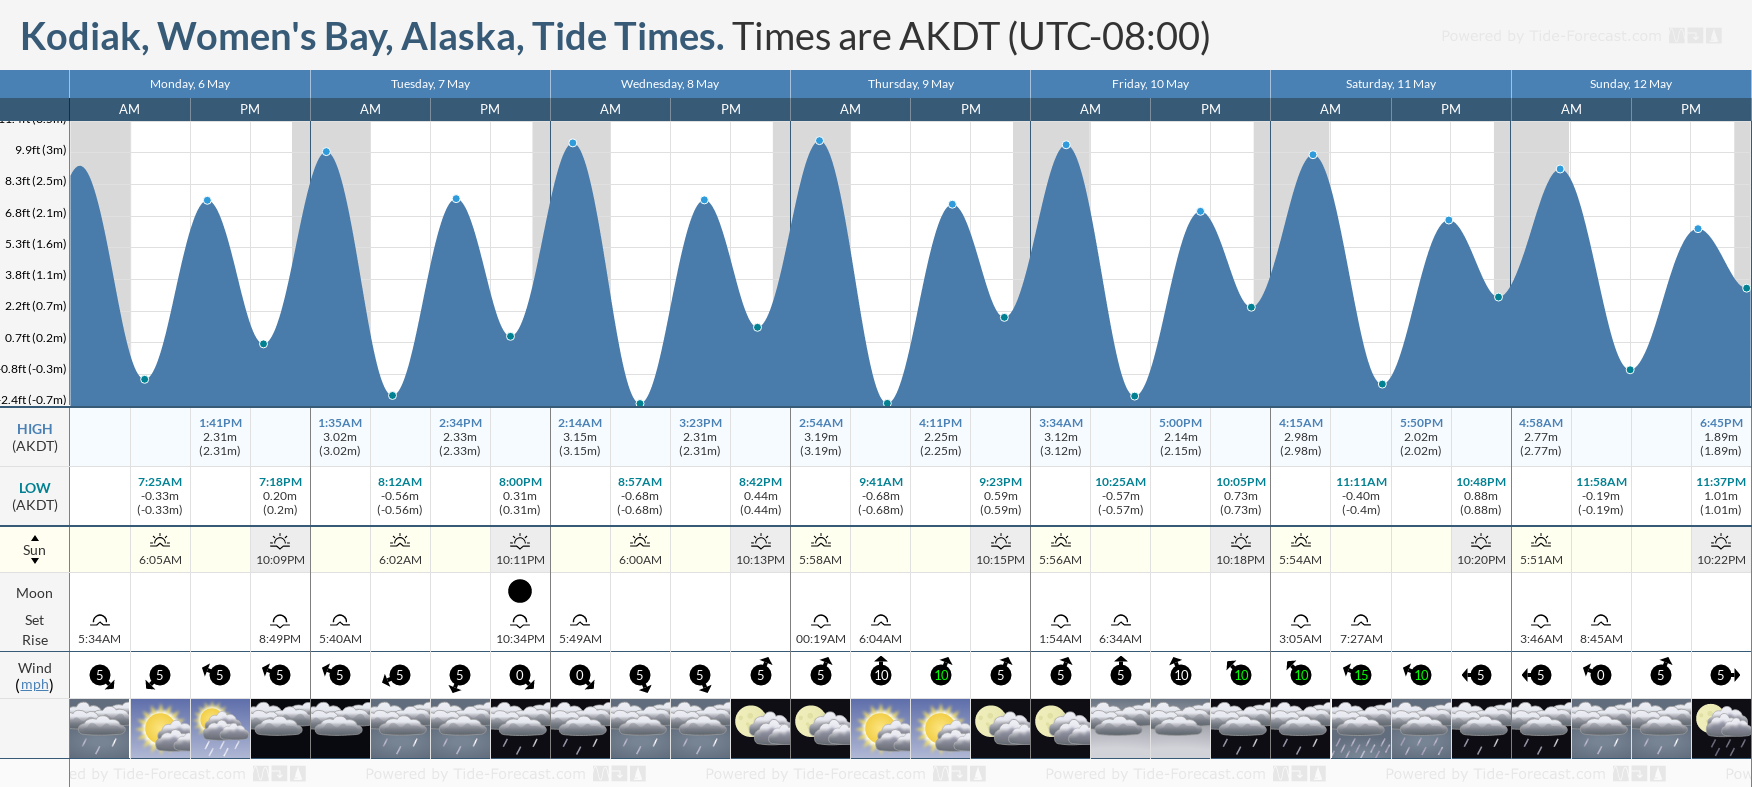 Kodiak, Women's Bay, Alaska Tide Chart including high and low tide tide times for the next 7 days